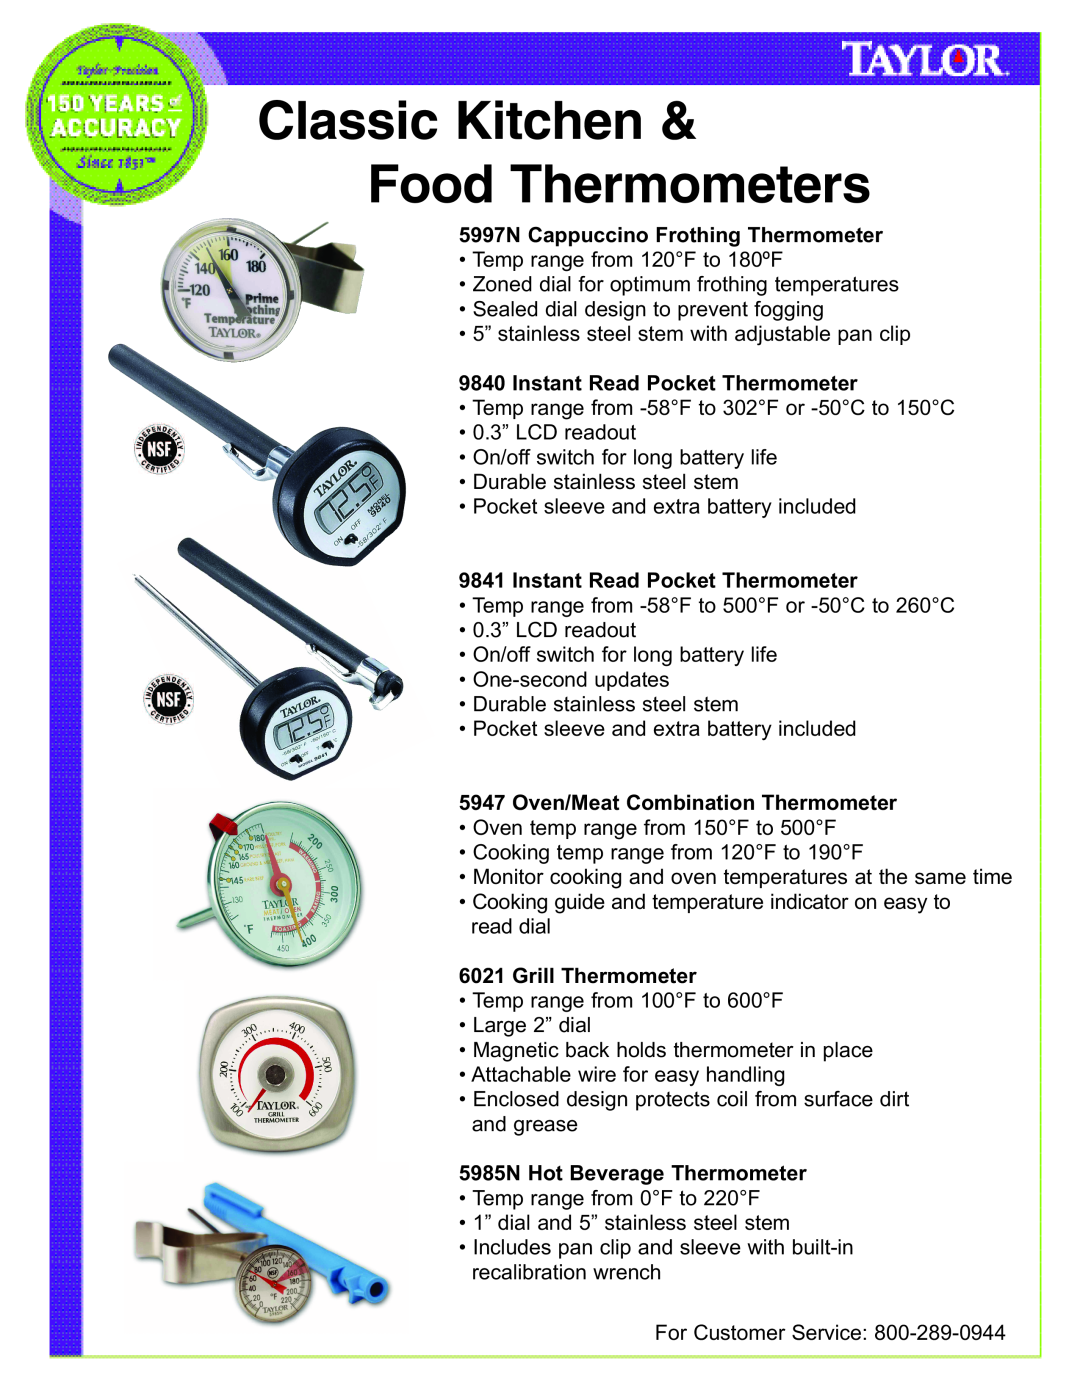 Taylor 5924 5997N Cappuccino Frothing Thermometer, Instant Read Pocket Thermometer, Oven/Meat Combination Thermometer 